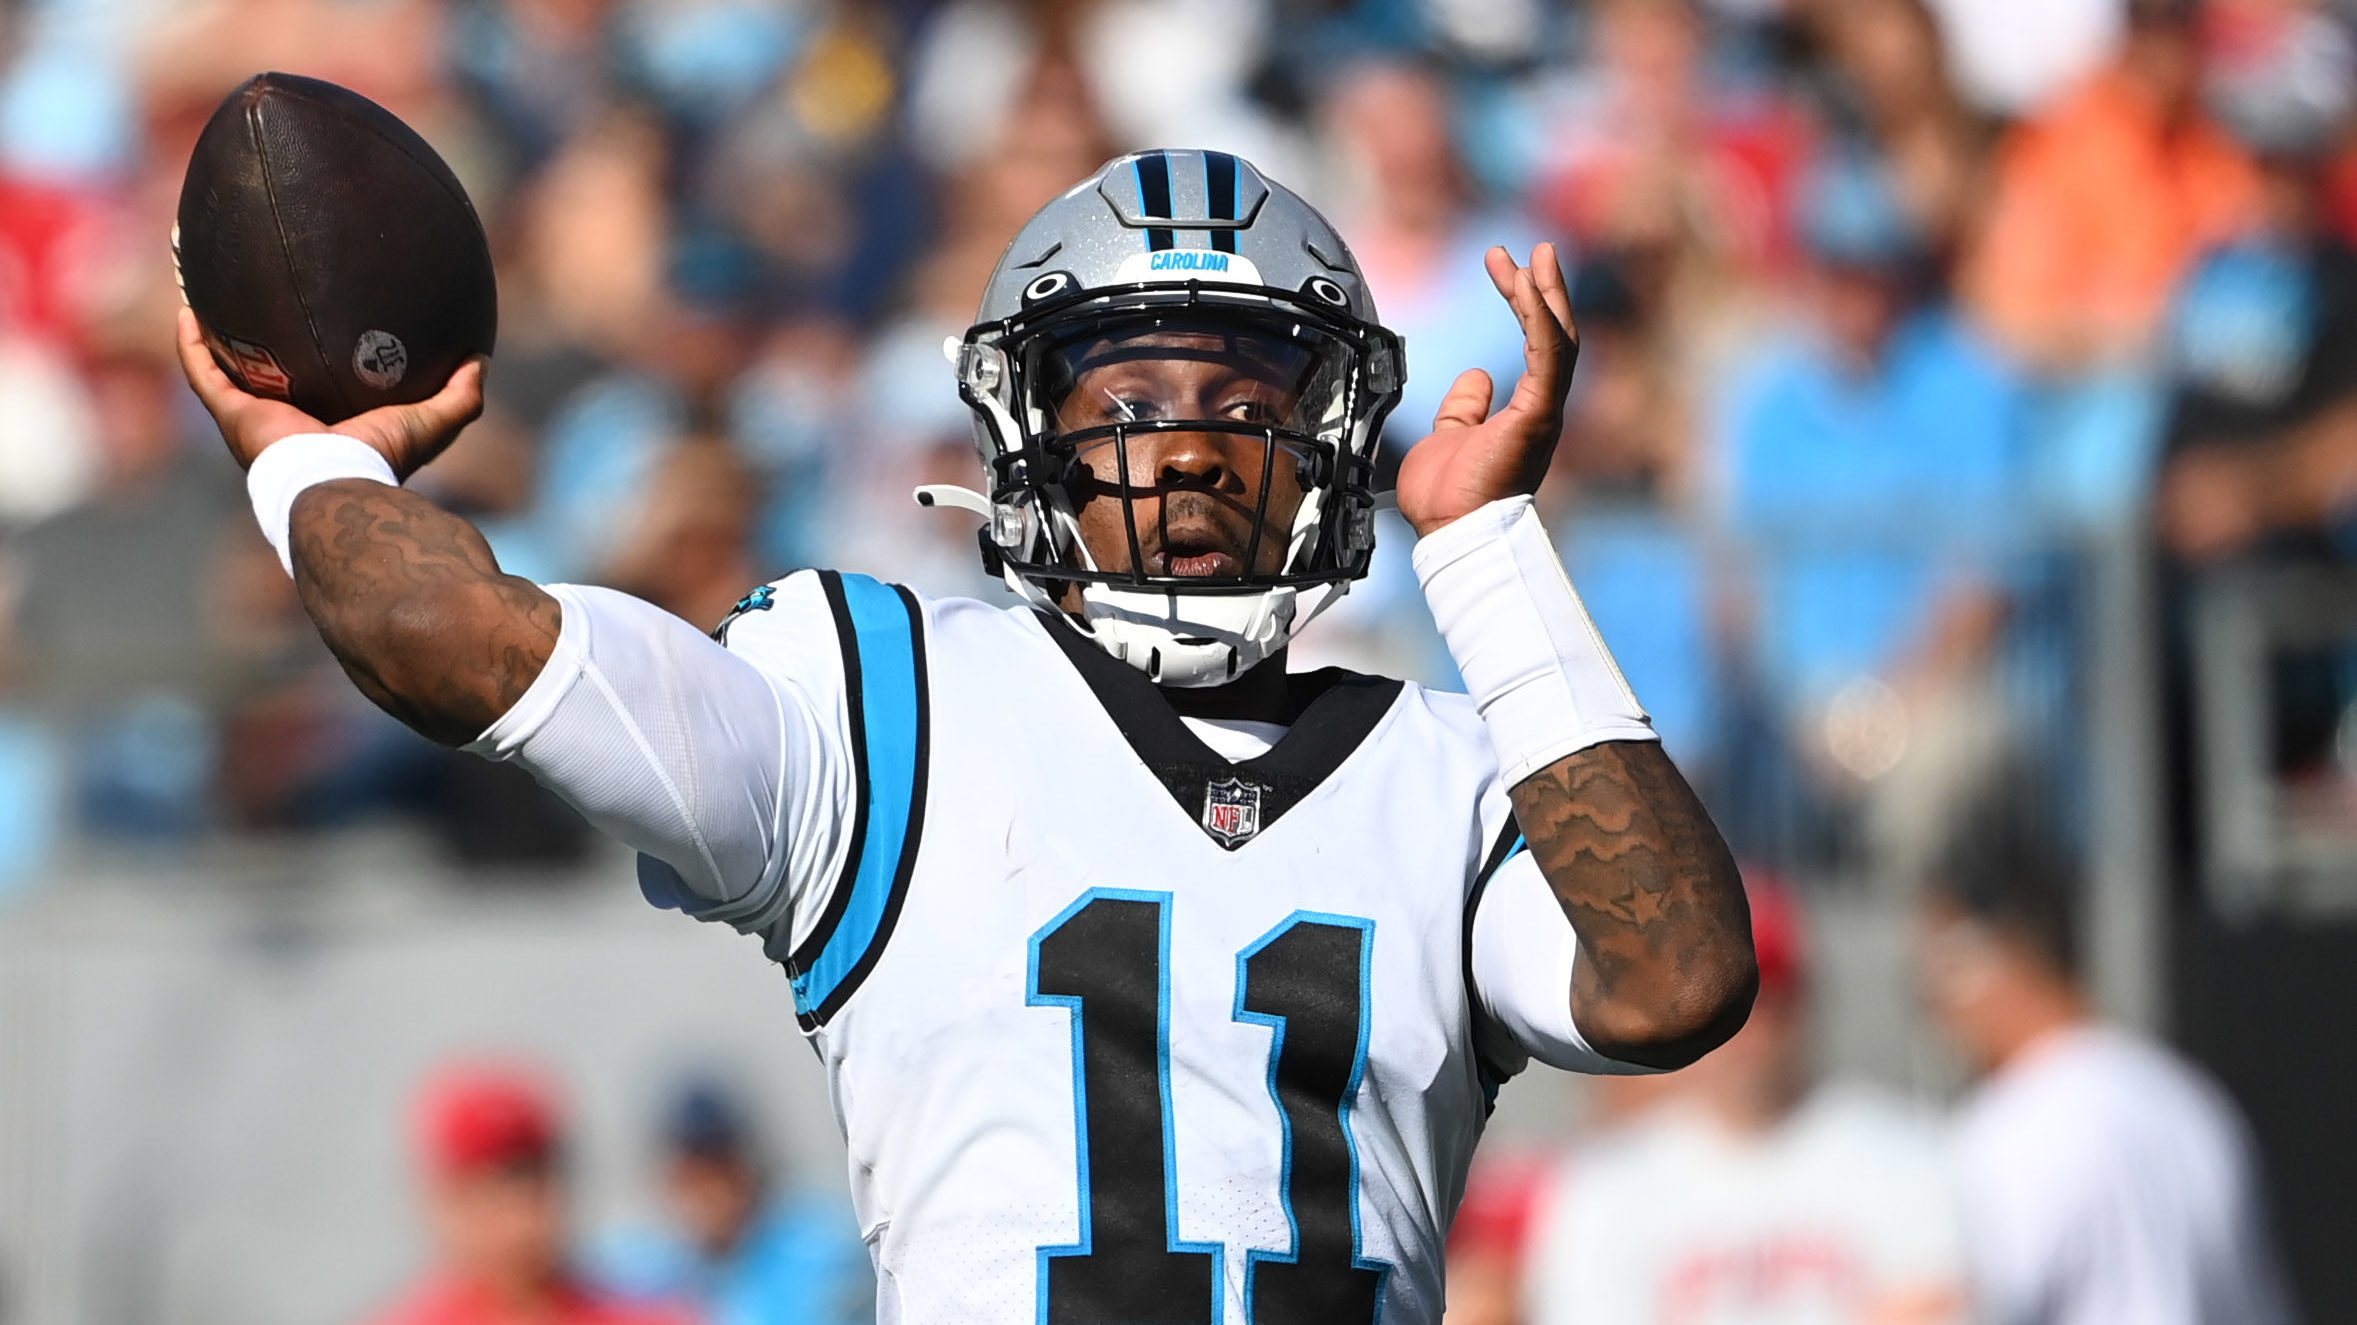 NFL Week 11 Betting: Odds, Spreads, Picks, Predictions for Panthers vs. Ravens